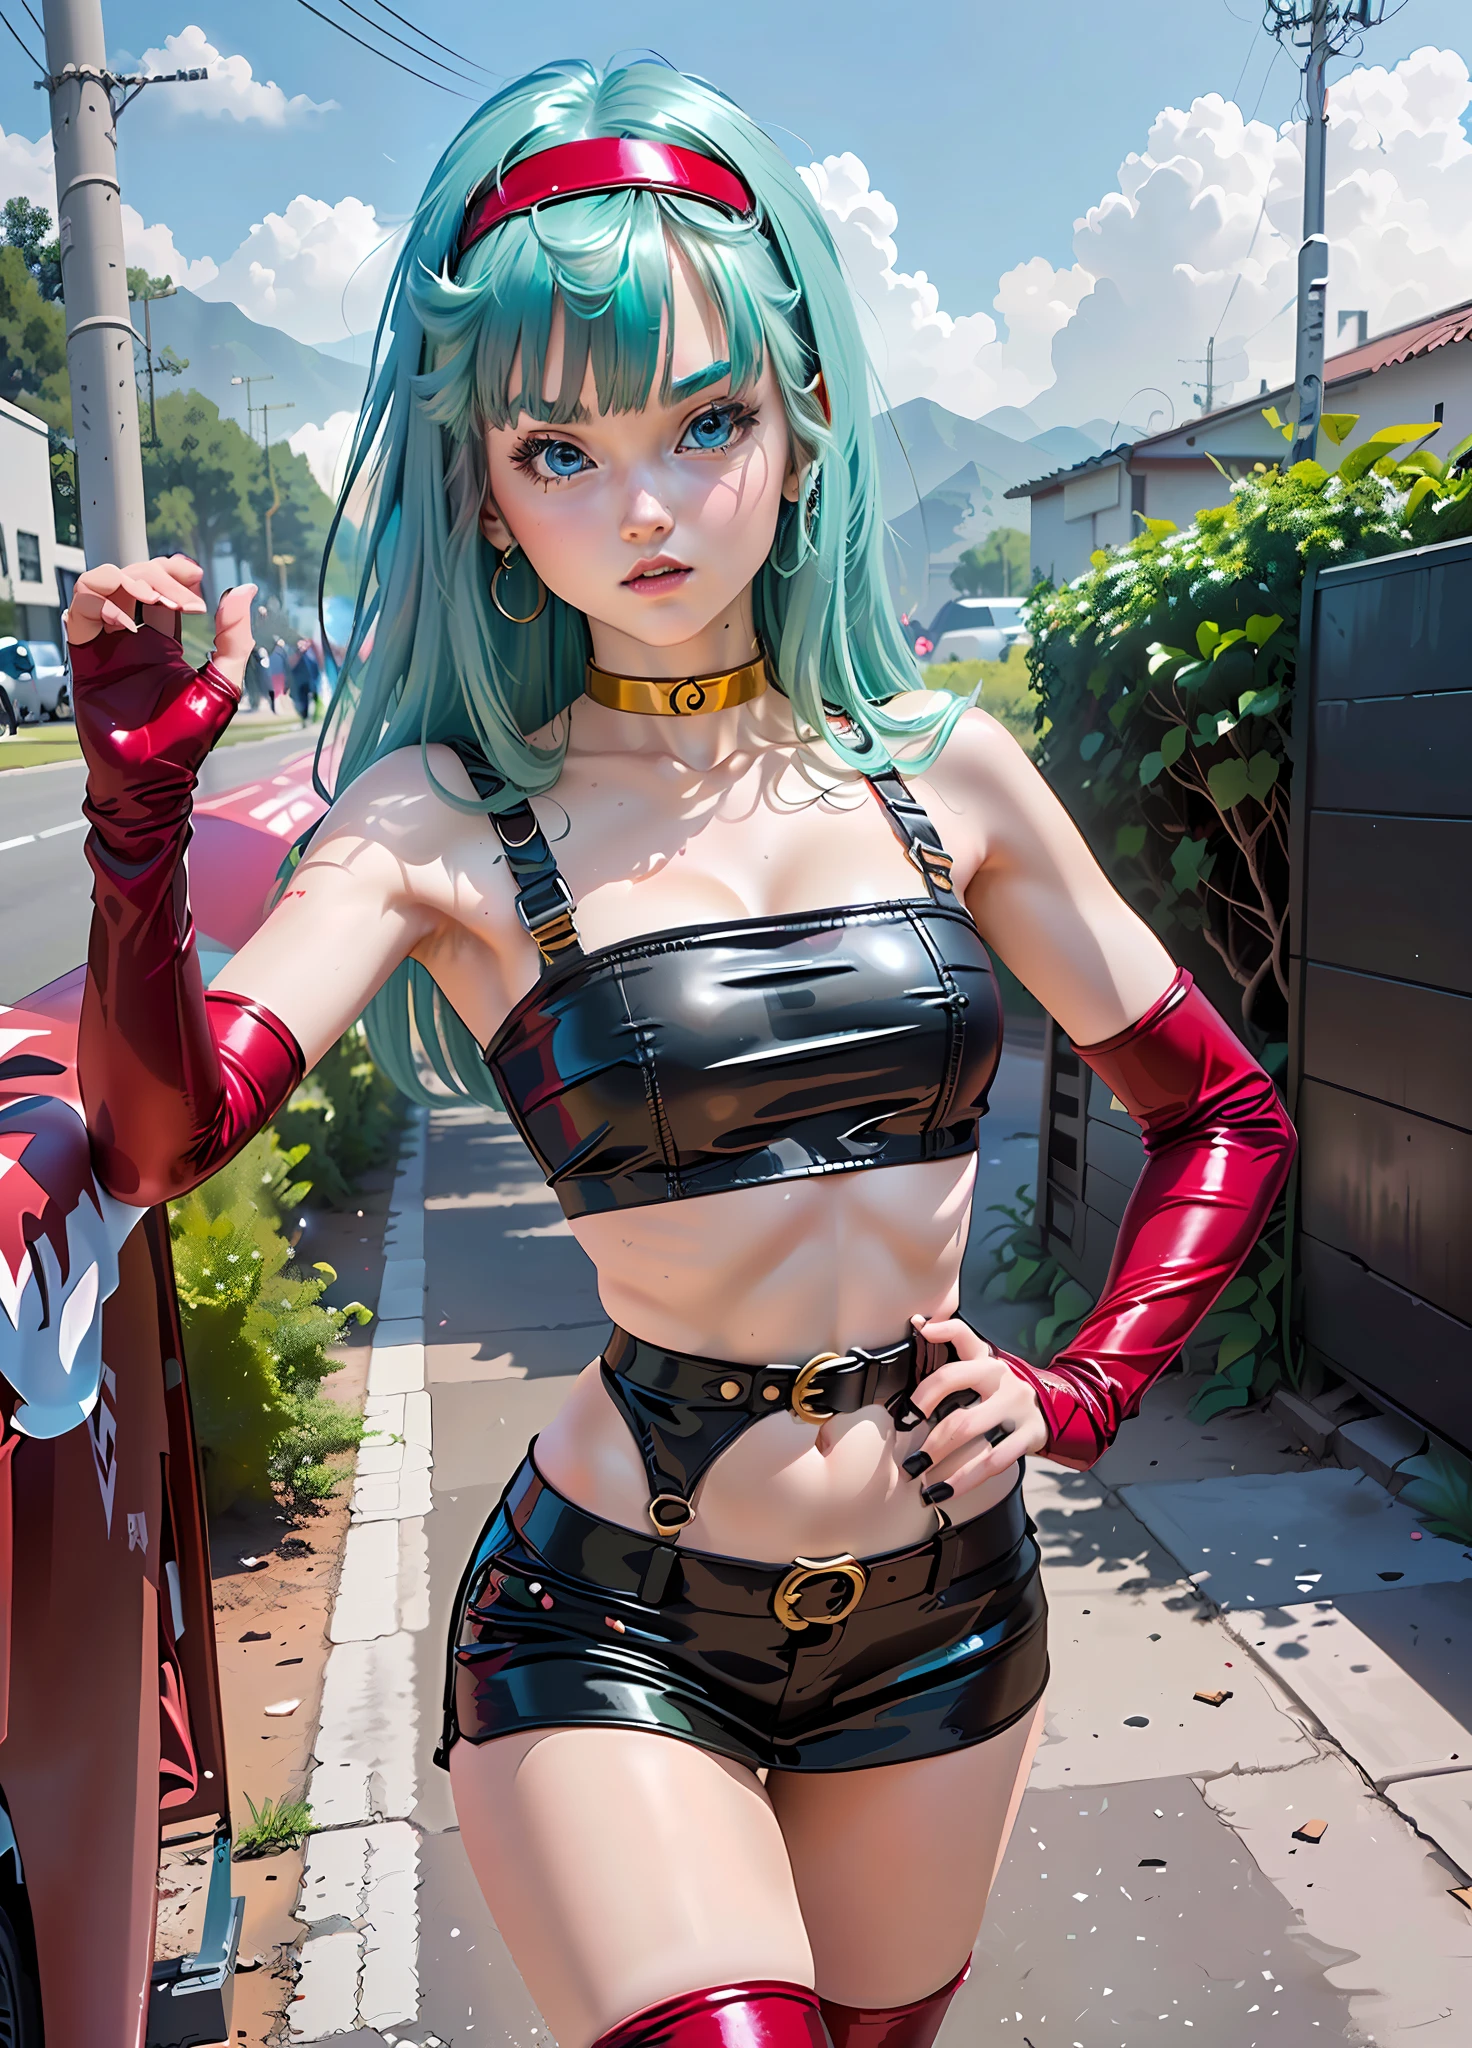 There is a girl in a leather outfit posing, Anime Girl Cosplay, Anime Girl in Real Life, Mikudayo, Bra from Dragon Ball GT, Hatsune Miku Cosplay, Realistic Anime 3D Style, Anime Cosplay, Anime Inspired, Anime Style. 8k, badass anime 8k, anime girl with blue hair, anime character; full-body art